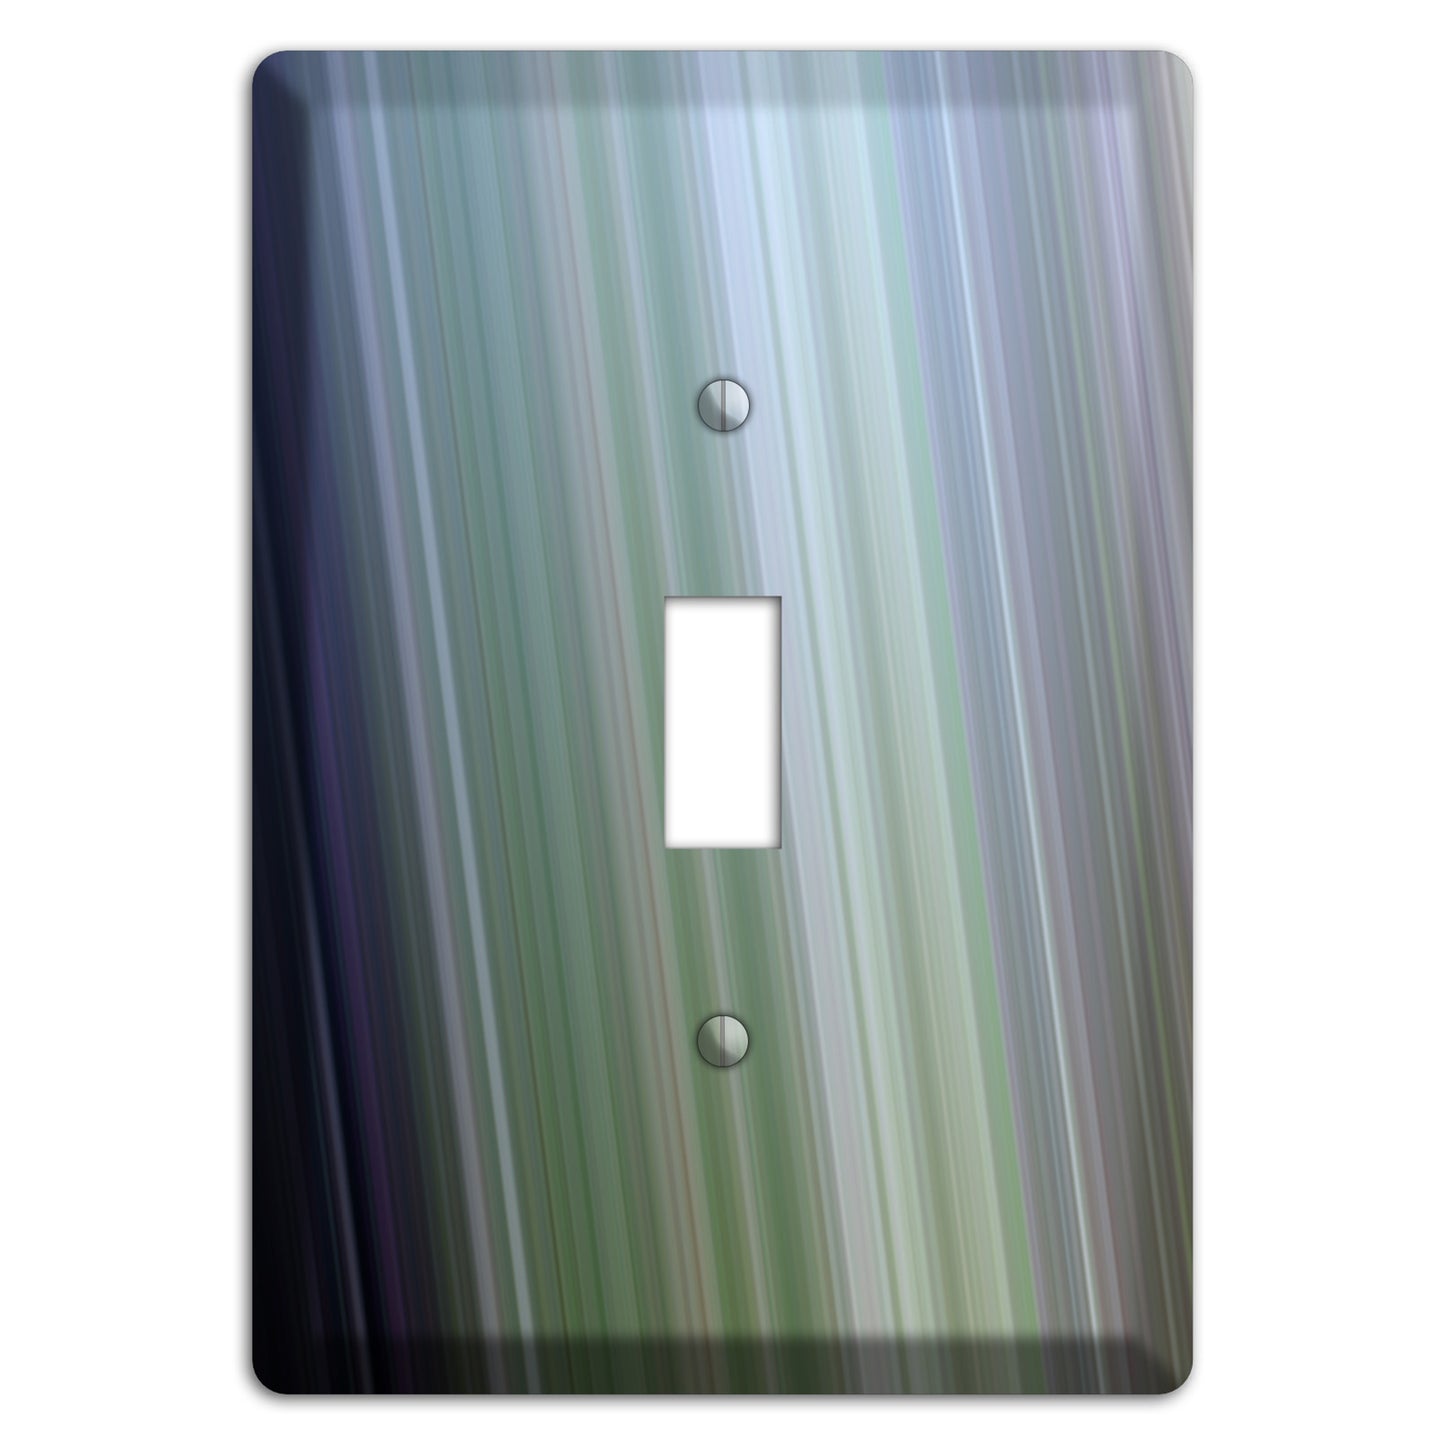 Purple and Green Ray of Light Cover Plates